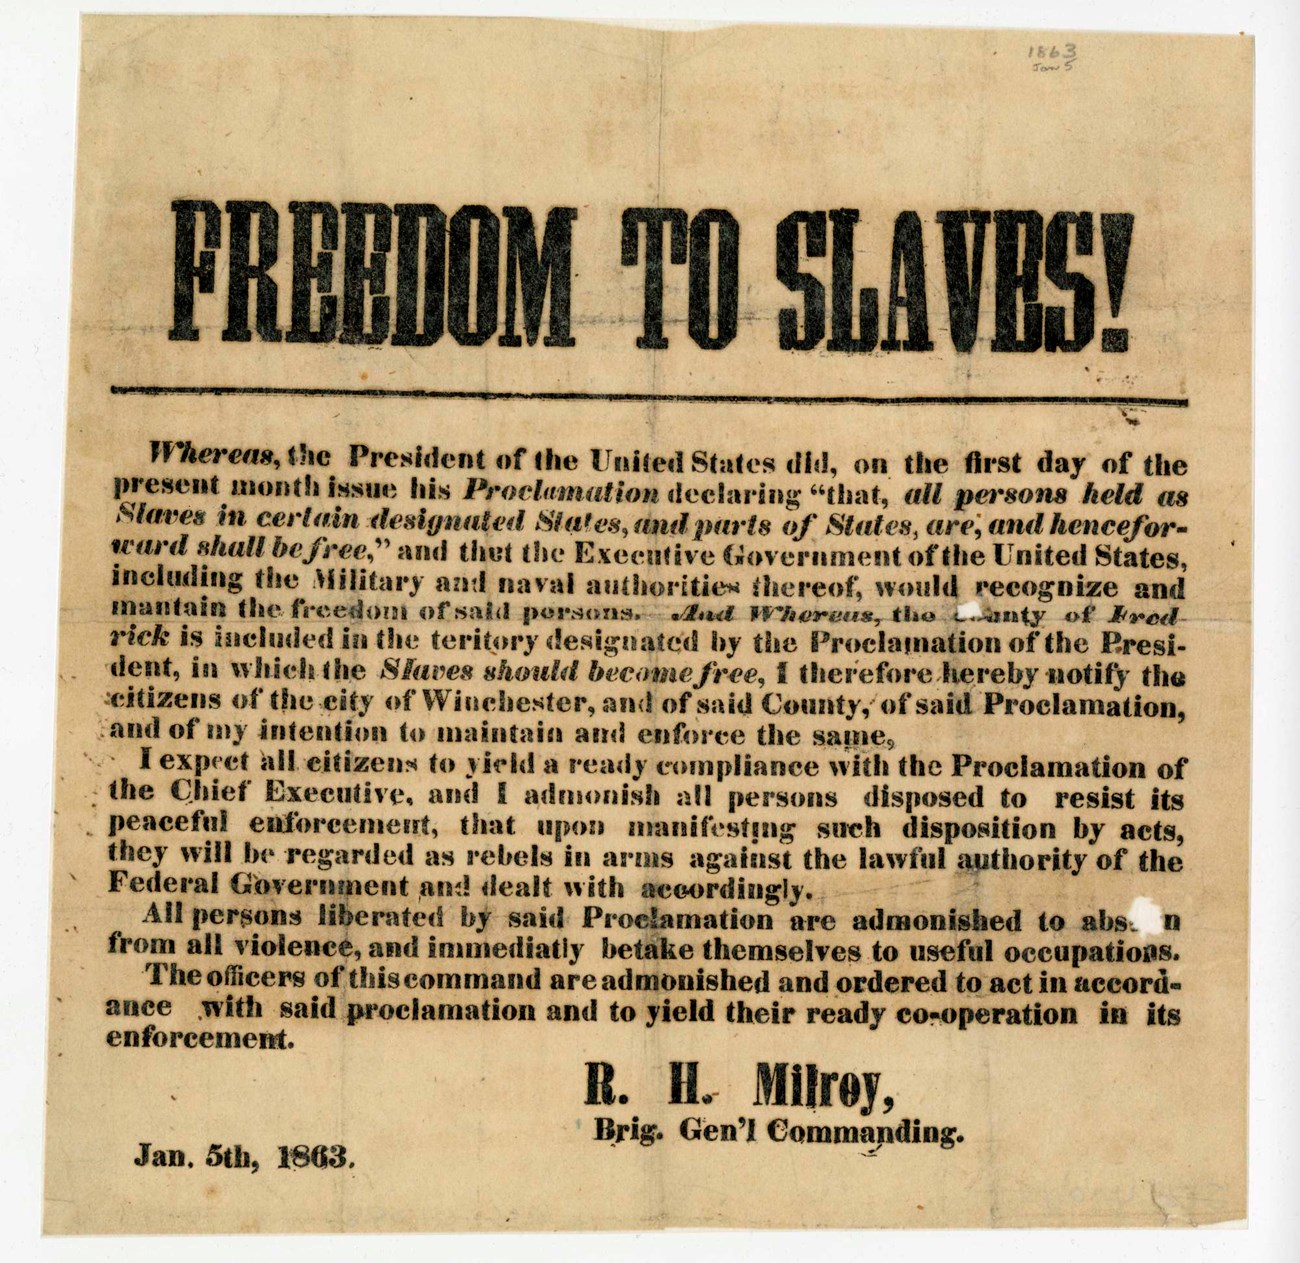 A weathered printed notice from 1863 proclaims freedom to slaves.